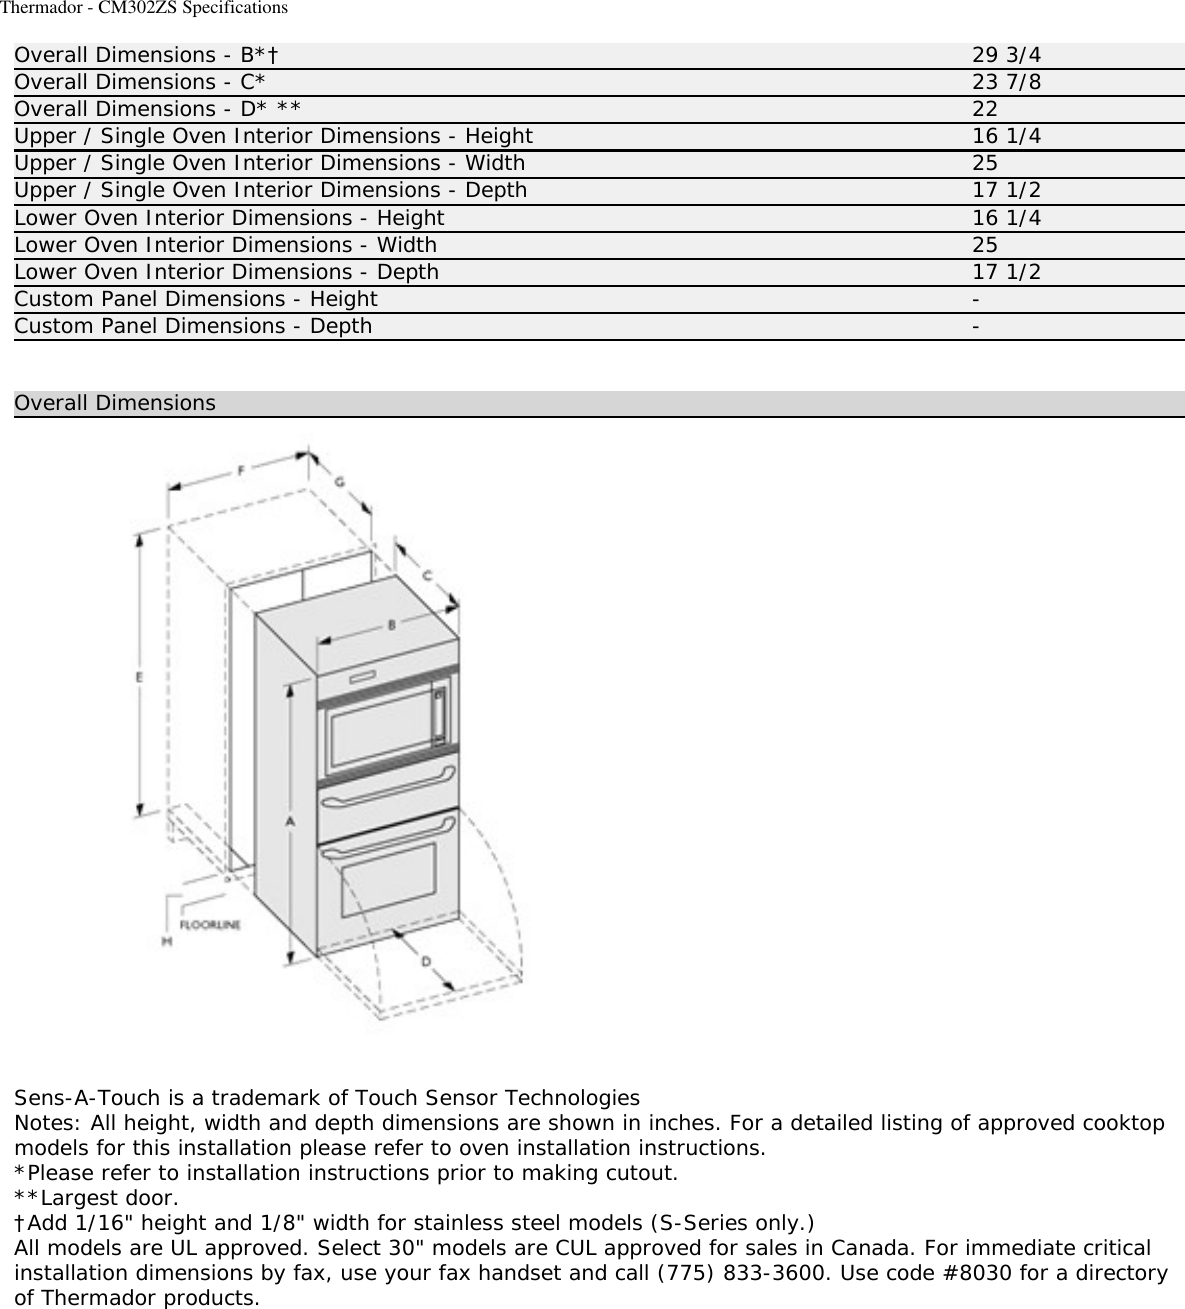 Page 2 of 2 - Thermador CM302 - CM302ZS Specifications User Manual  To The 41ed50db-93f6-437f-afa9-fdd822527fee